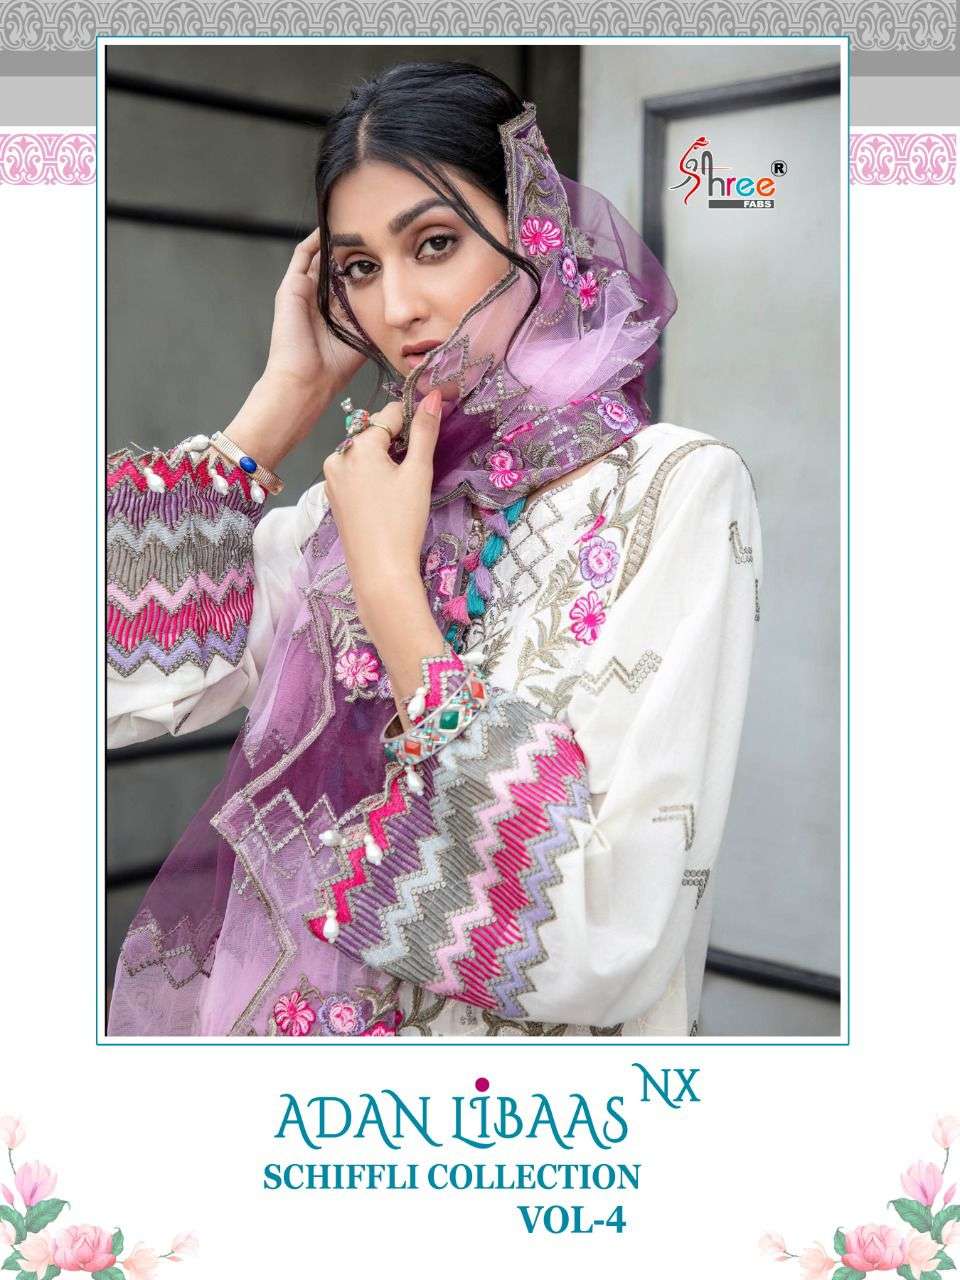 SHREE FAB ADAN LIBAAS SCHIFFLI COLLECTION VOL 4 NX DESIGNER COTTON PRINTED WITH EMBROIDERY WORK PAKISTANI PATTERN SUITS WHOLESALE